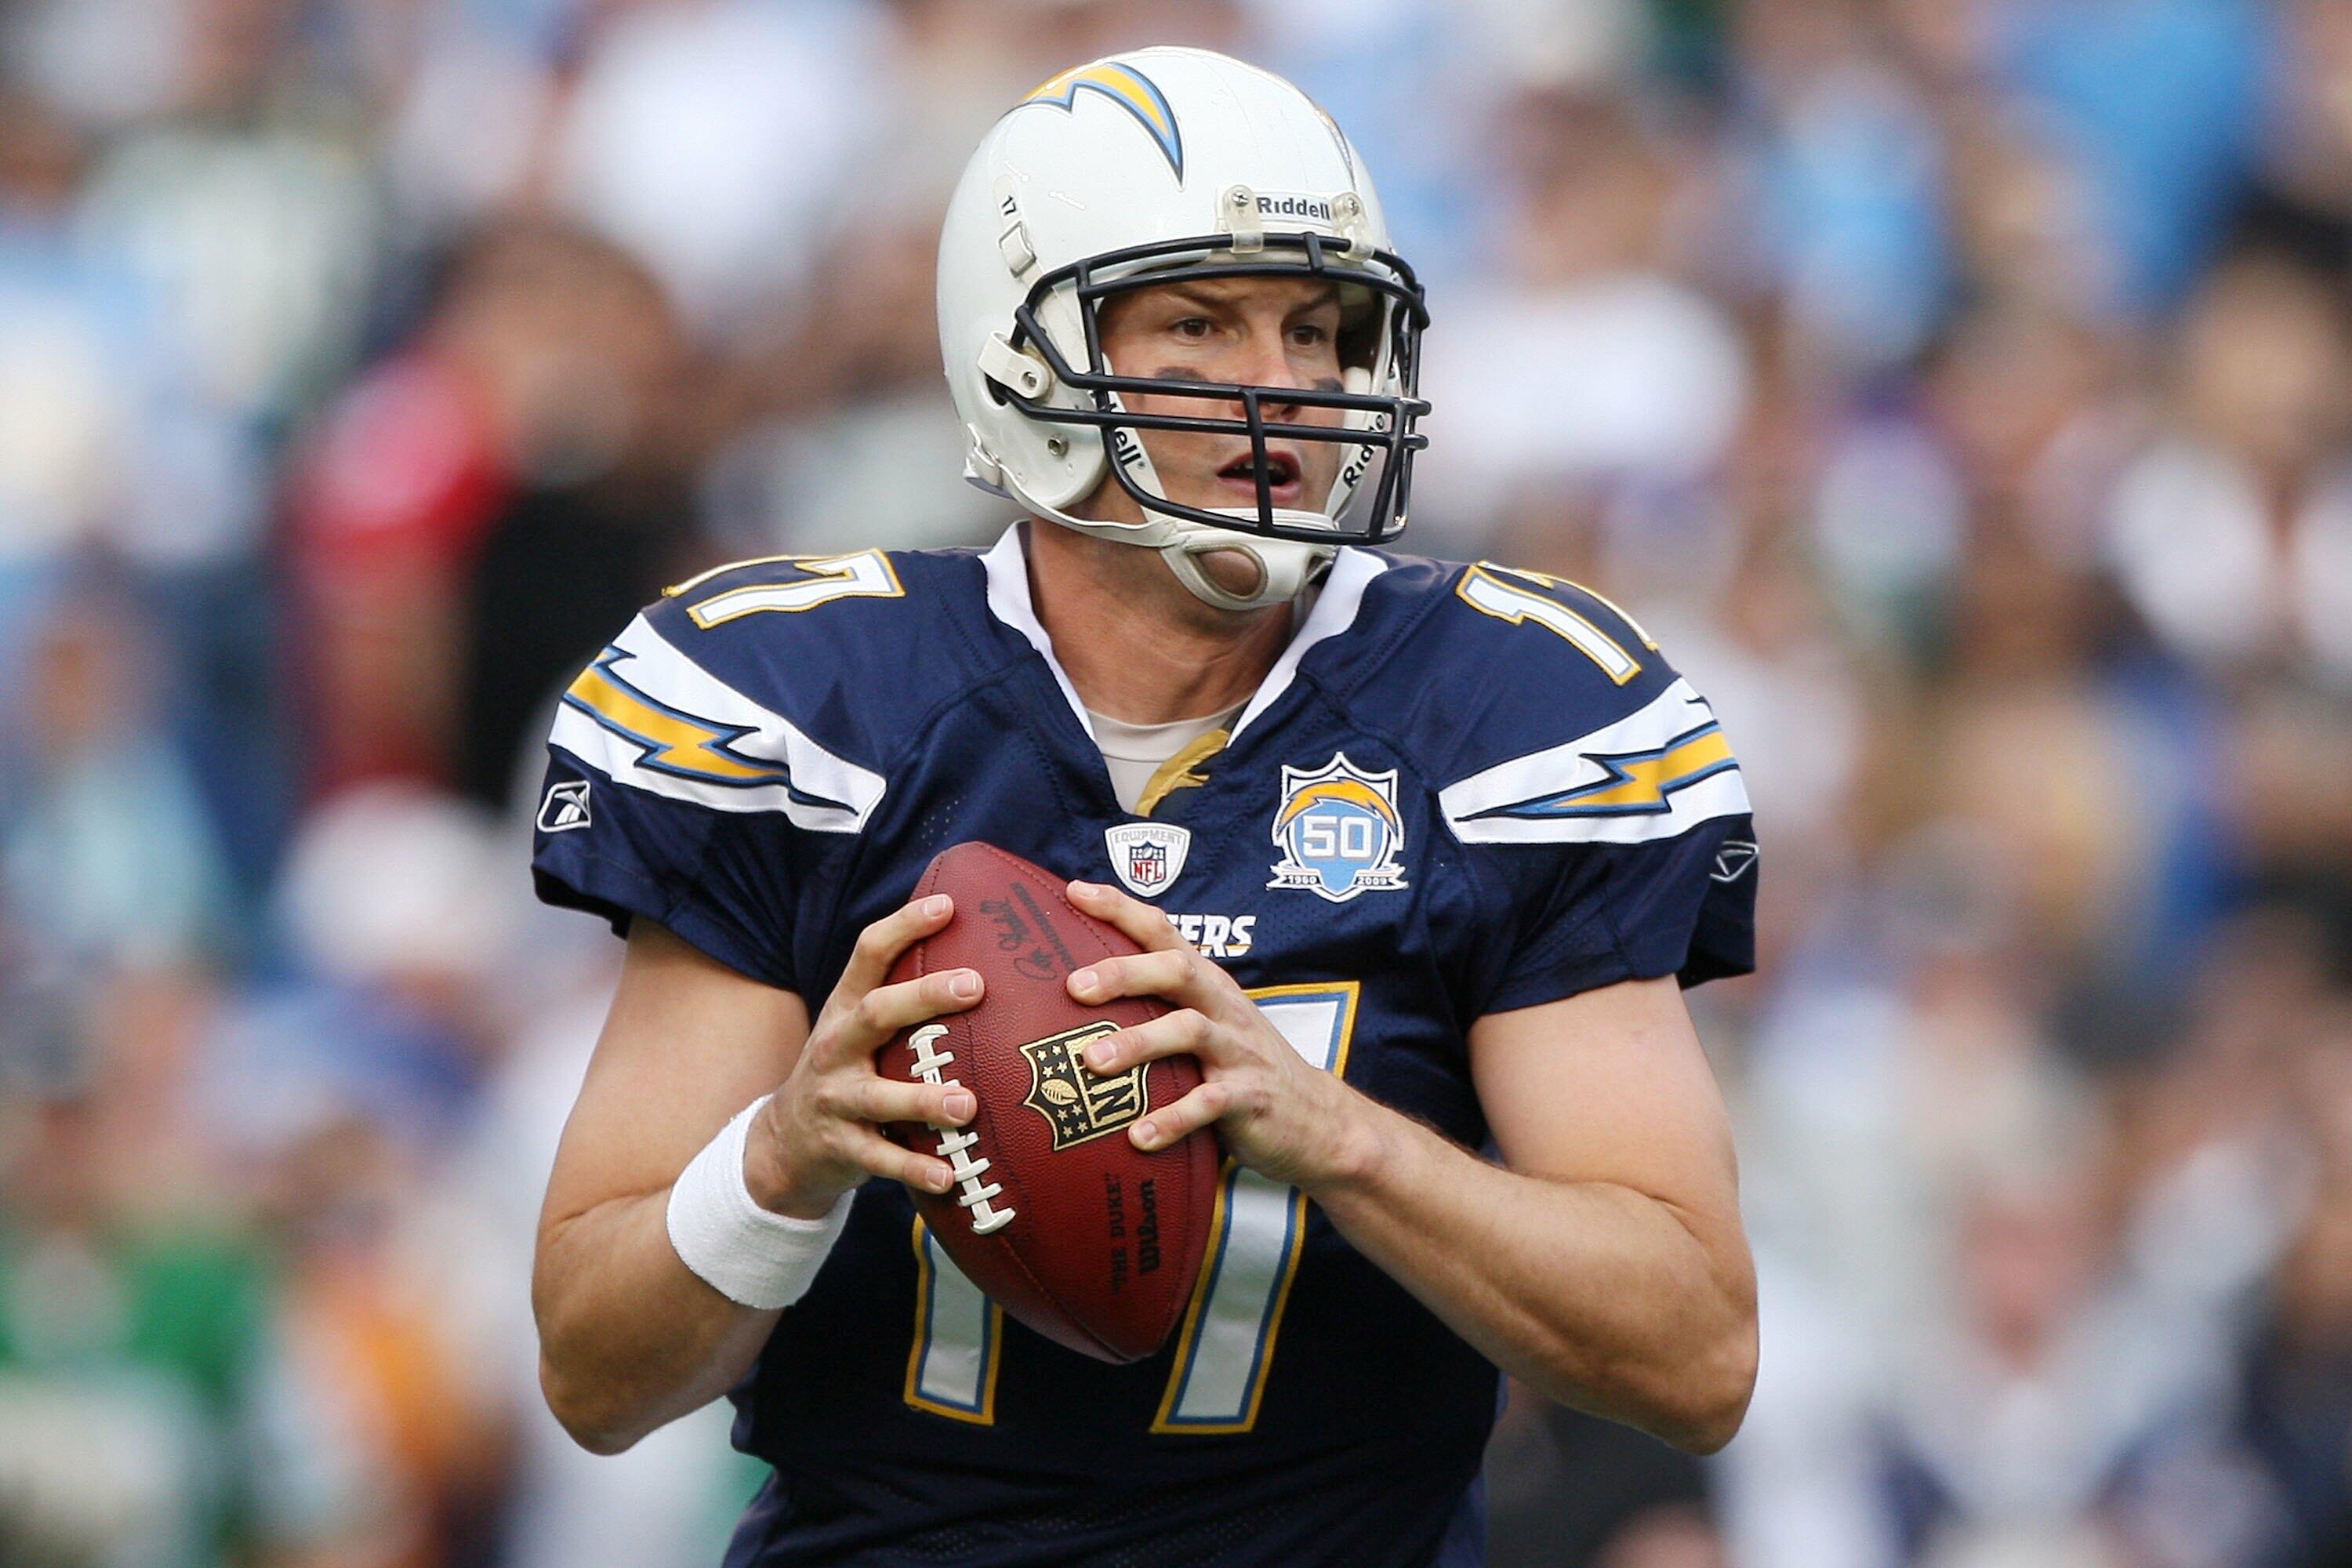 Breaking News: Chargers Announce Philip Rivers Will Not Be Returning - Thumbnail Image